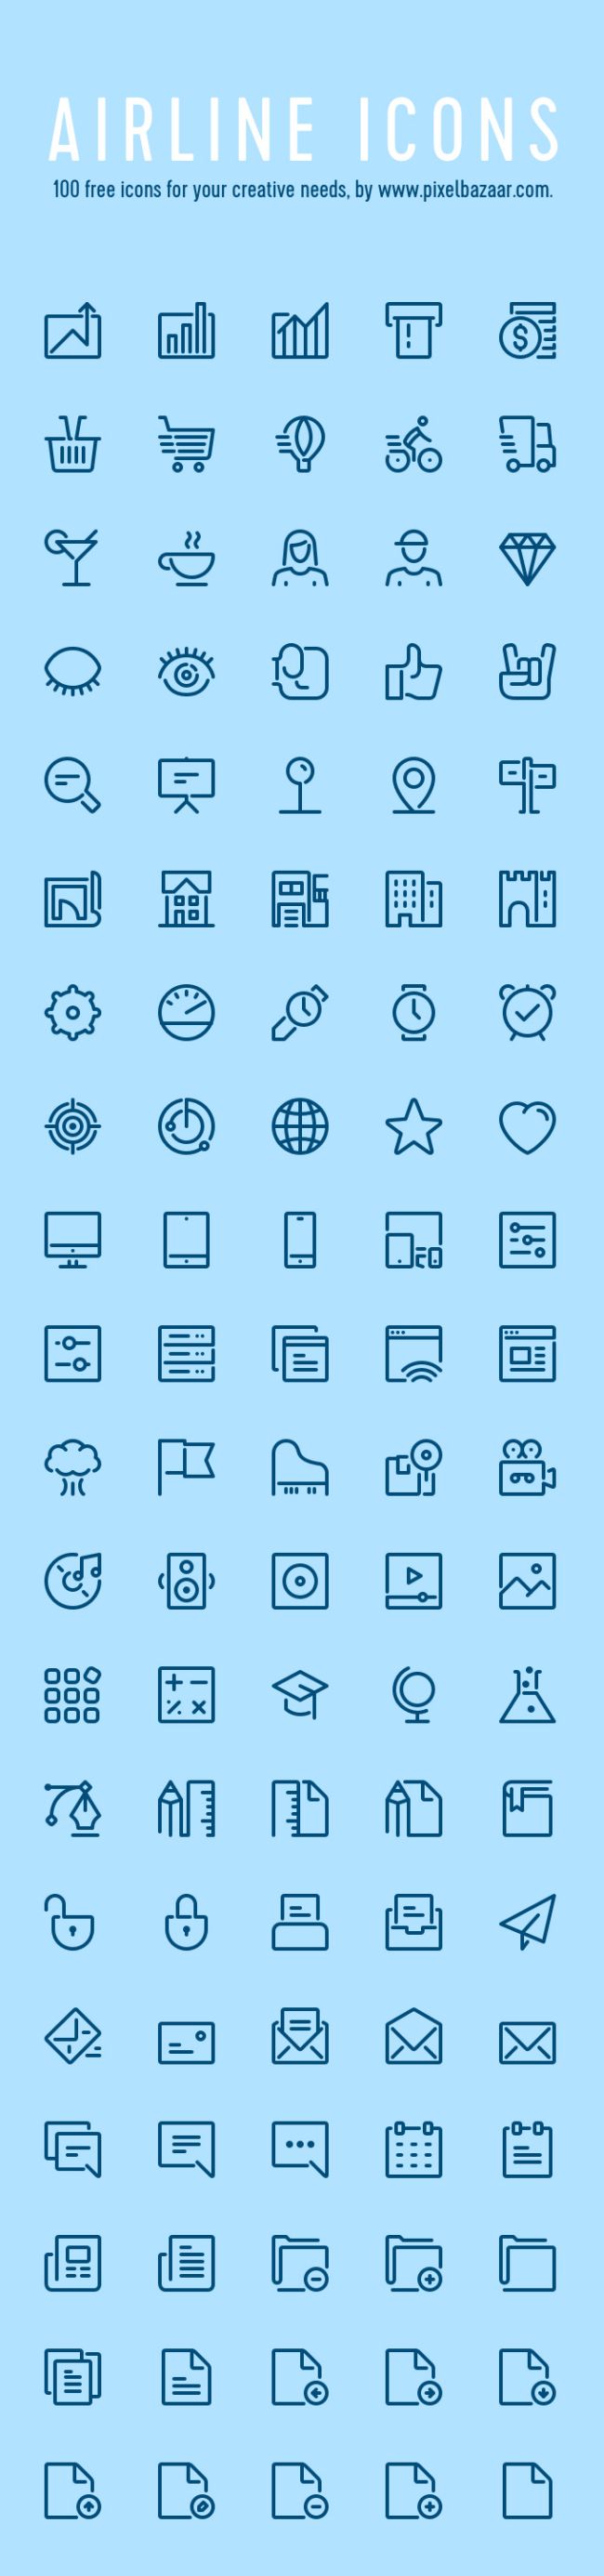 100 Free Airline Icons